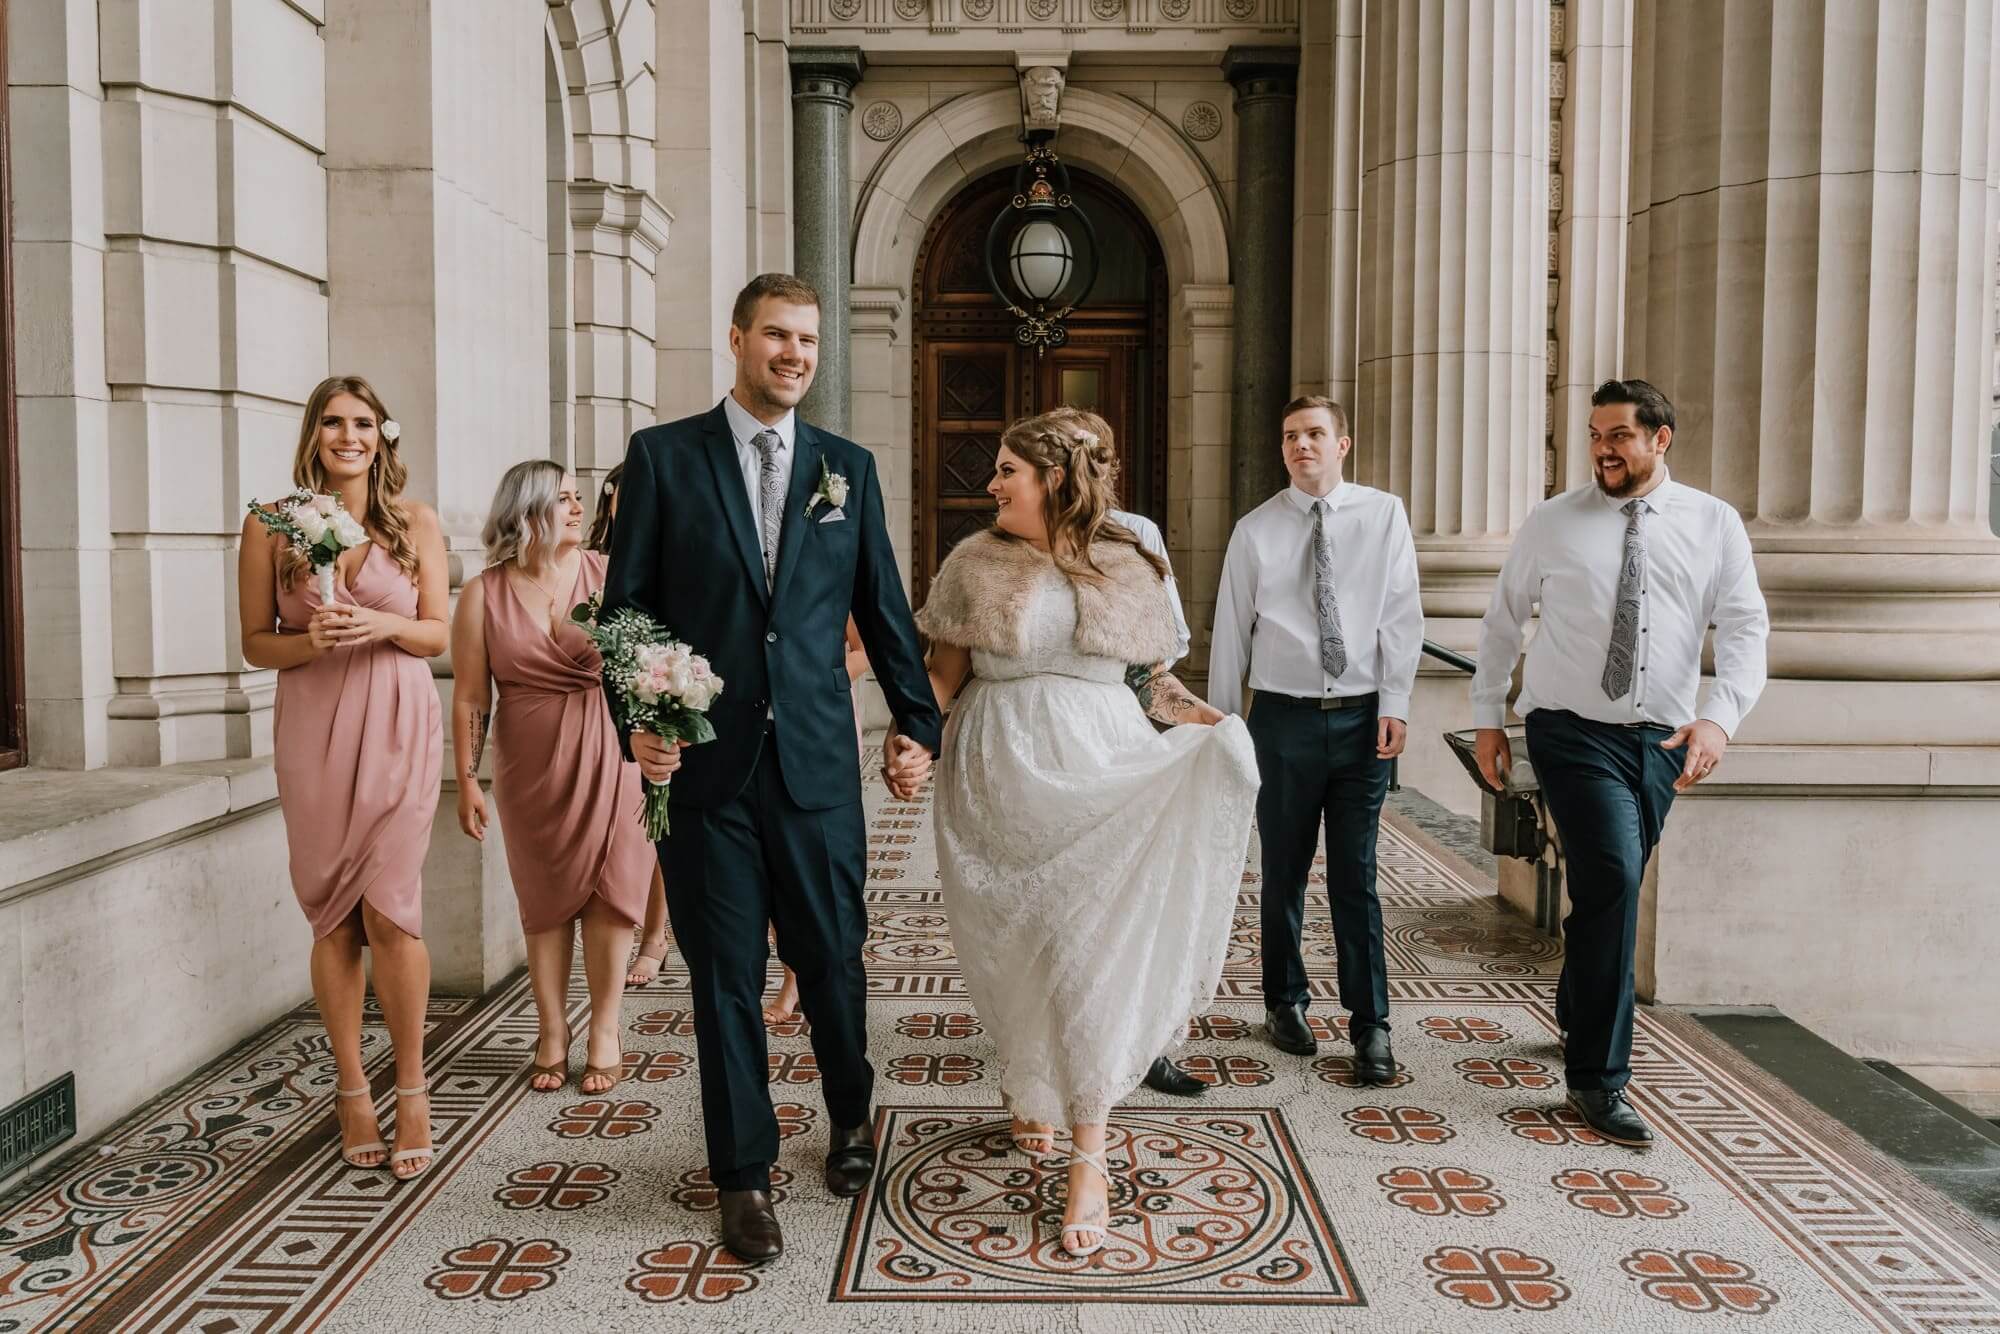 The bride and groom walks along the hallway of a building with large columns - flanked by their bridesmaids and groomsmen in either side.